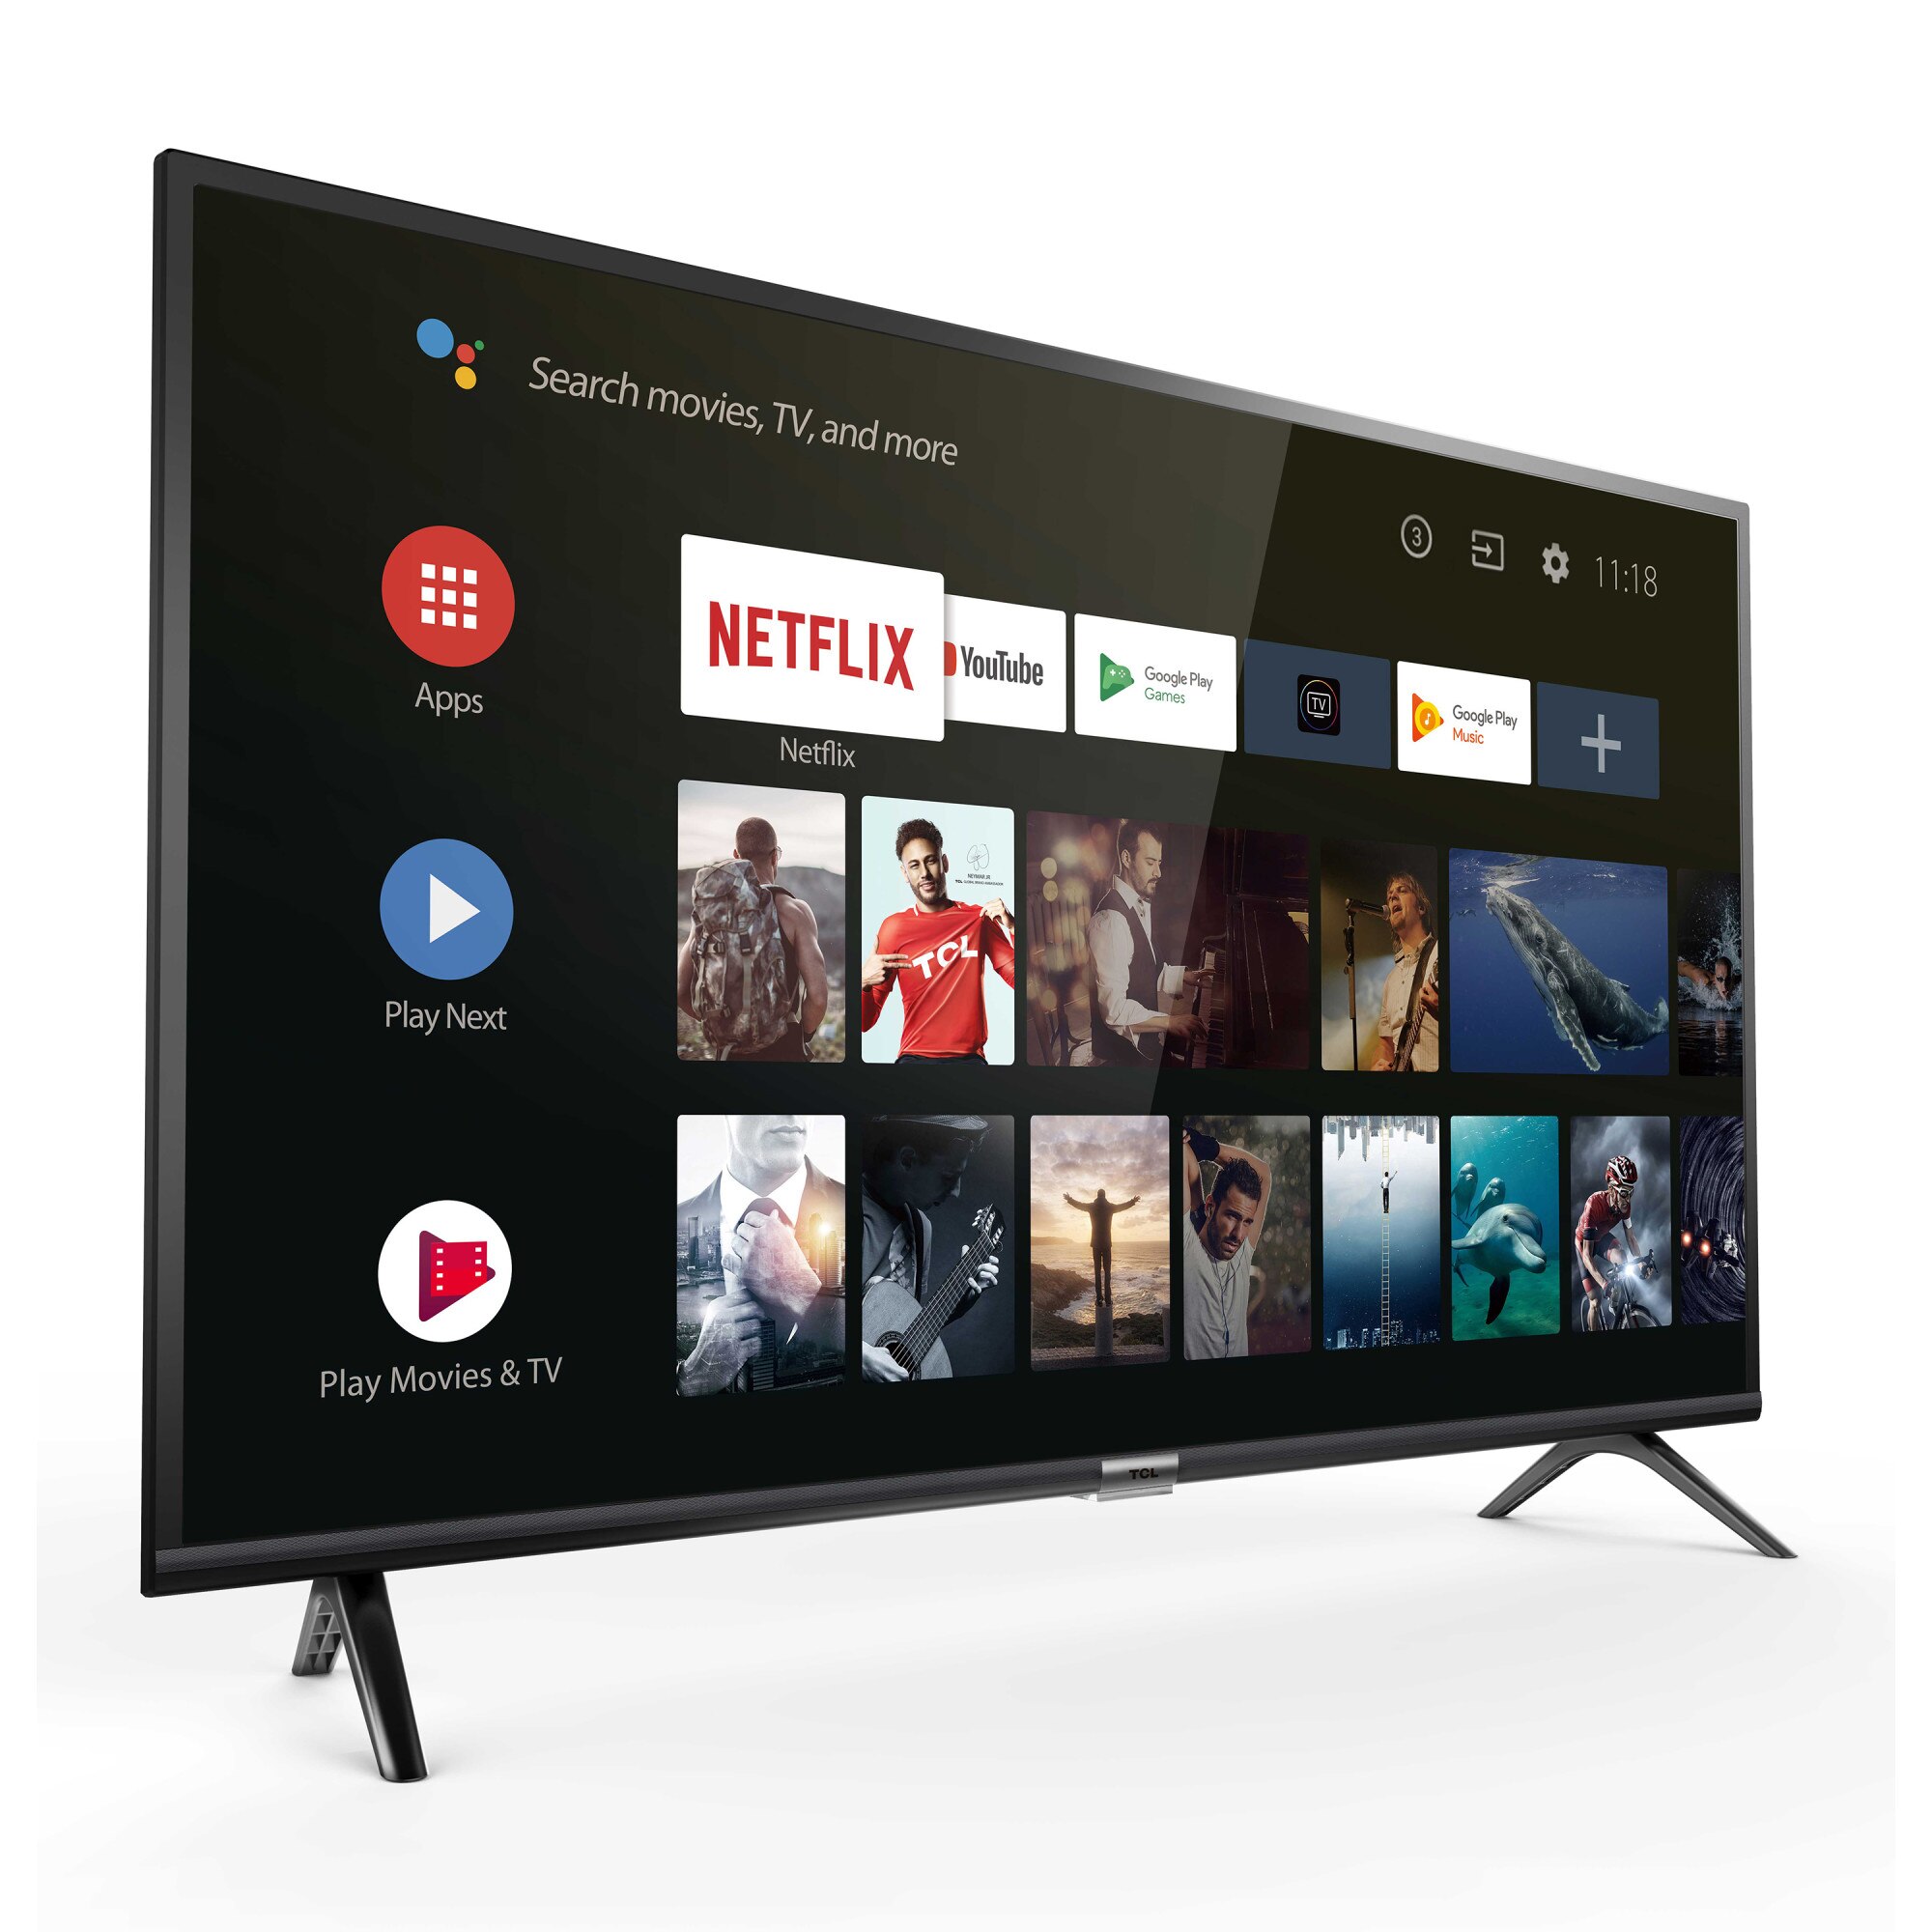 Tcl 32es563 Android Smart Televizio 80 Cm Hd Ready Emag Hu